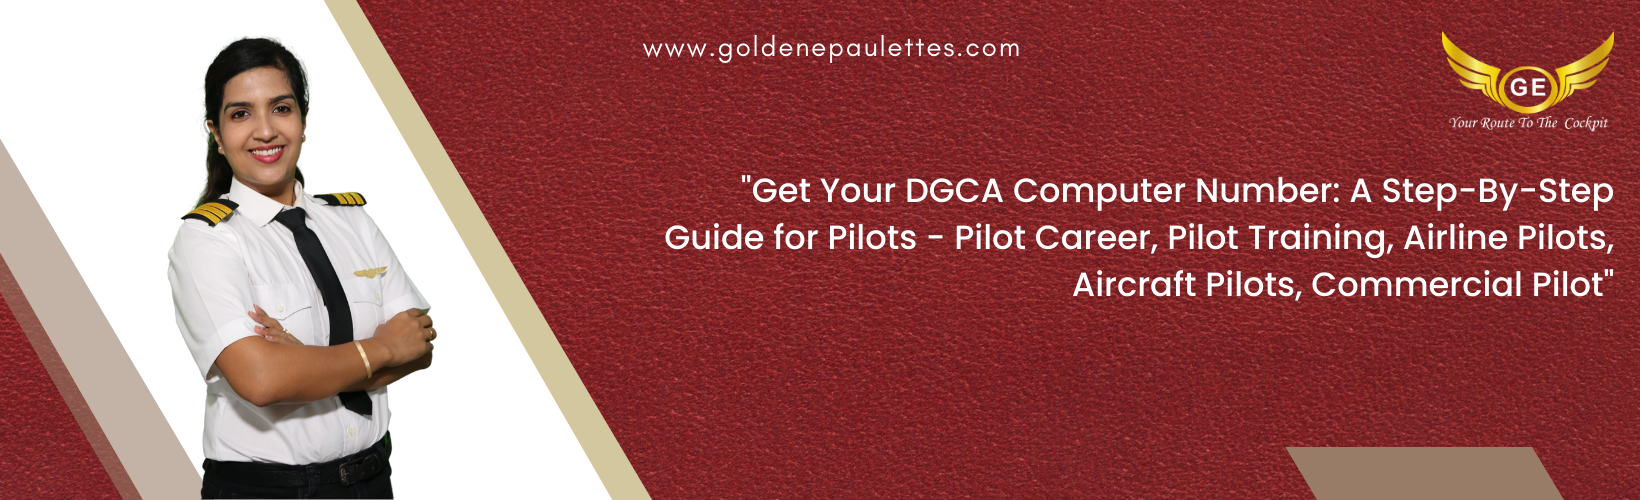 A Guide to Obtaining a DGCA Computer Number